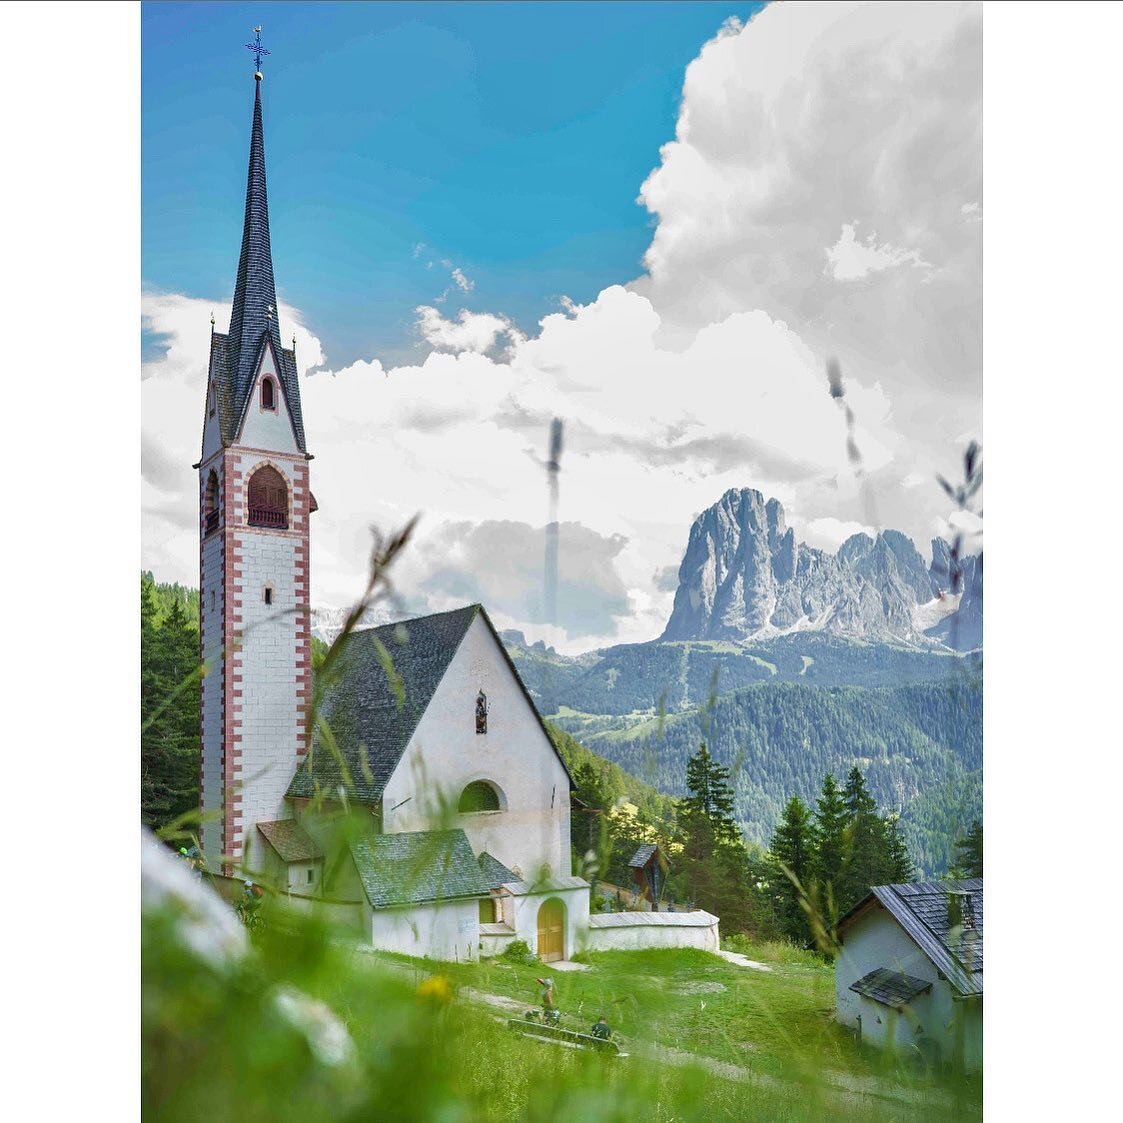 If you, like us, want to extend your summer, we suggest you take advantage of the warm temperatures that linger well into October through northern Italy.  The idyllic valleys of the Dolomites offer the perfect environment for a regenerative journey, 